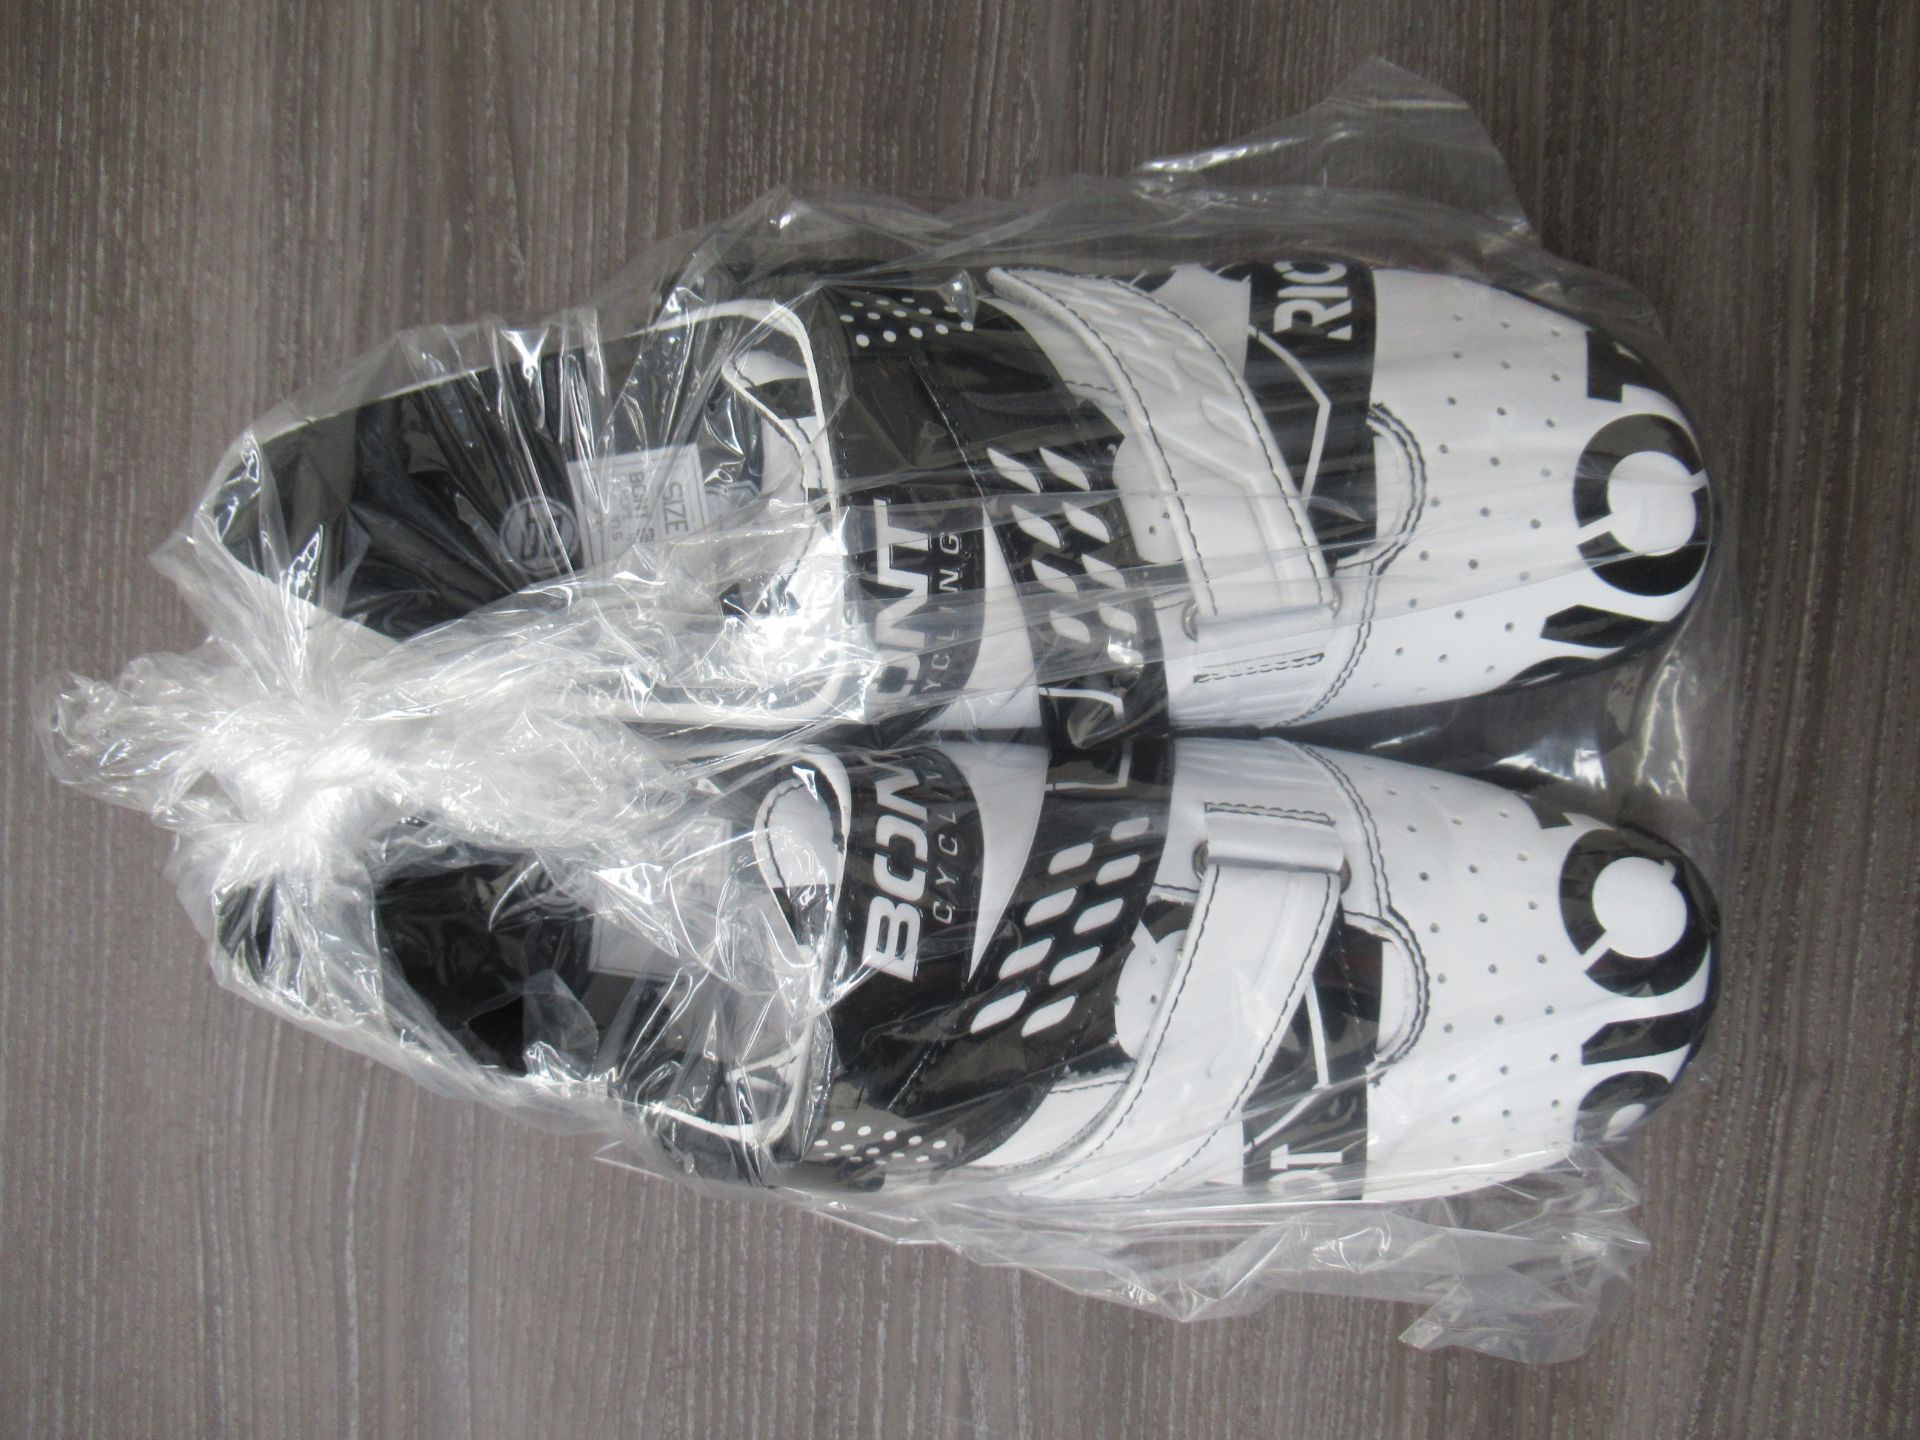 Pair of Bont Riot Buckle cycling shoes (white/black) - boxed EU size 45 (RRP£104.99)